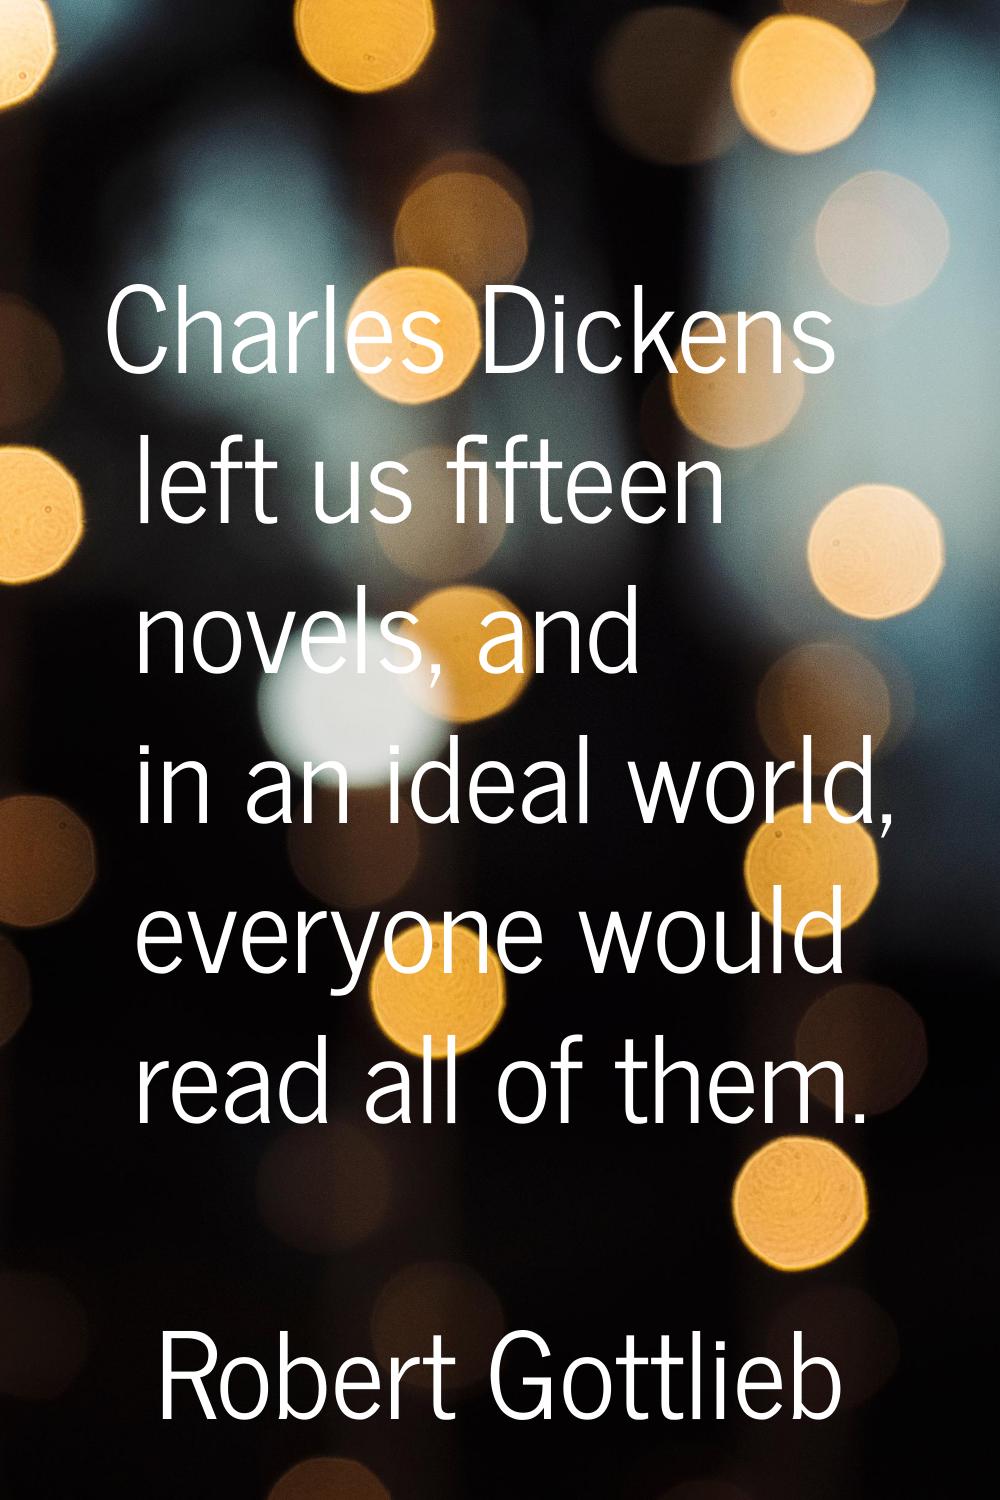 Charles Dickens left us fifteen novels, and in an ideal world, everyone would read all of them.